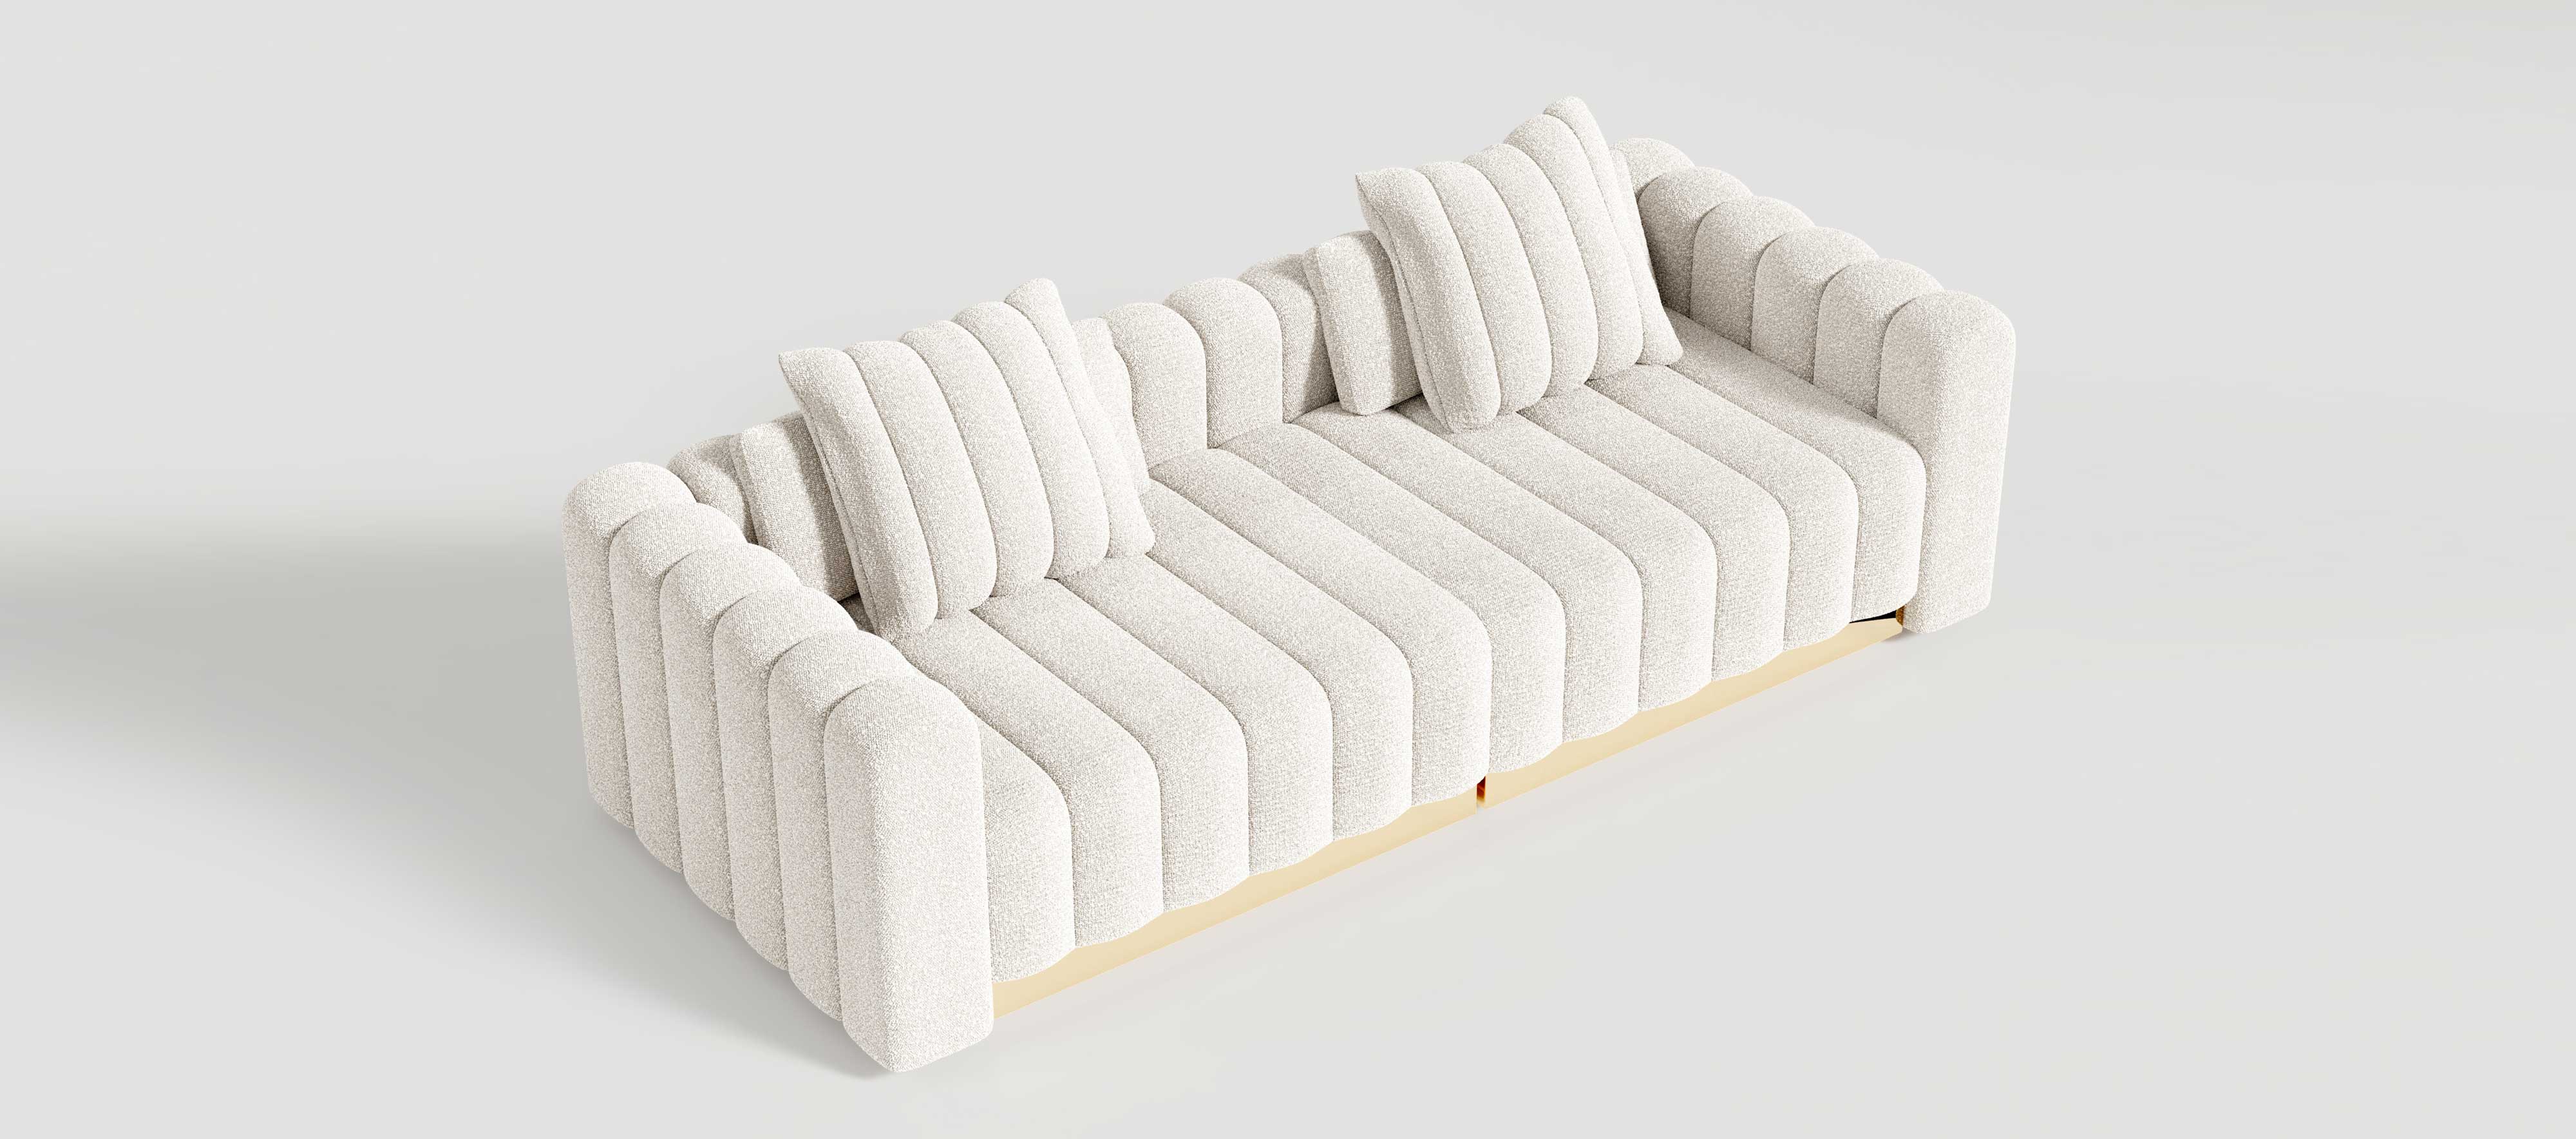 El Mar Modular Sofa with Polished Bronze and white Fabric